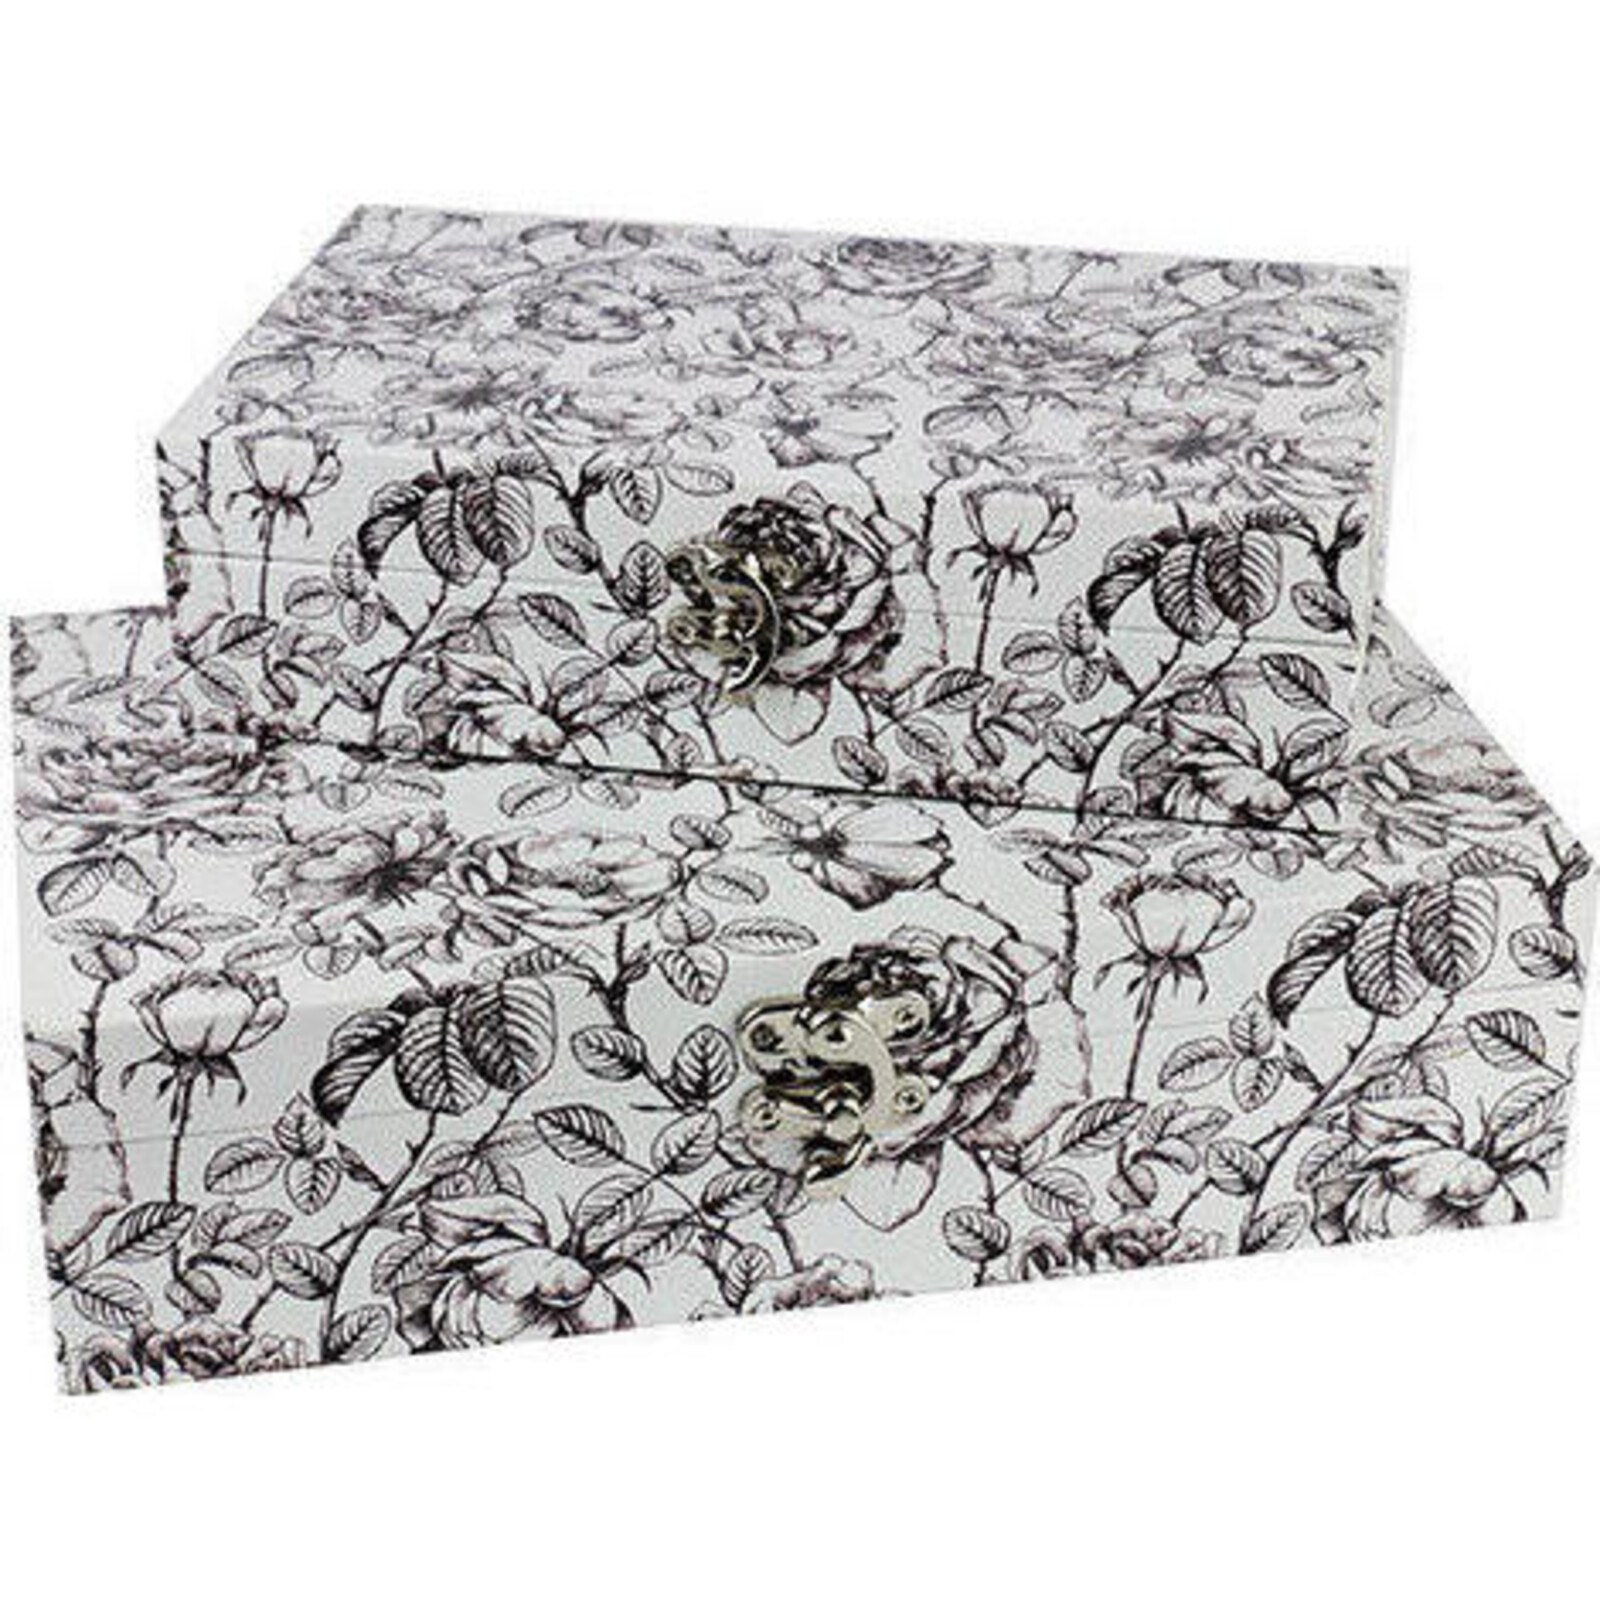 Boxes Flower Toile Lg S/2